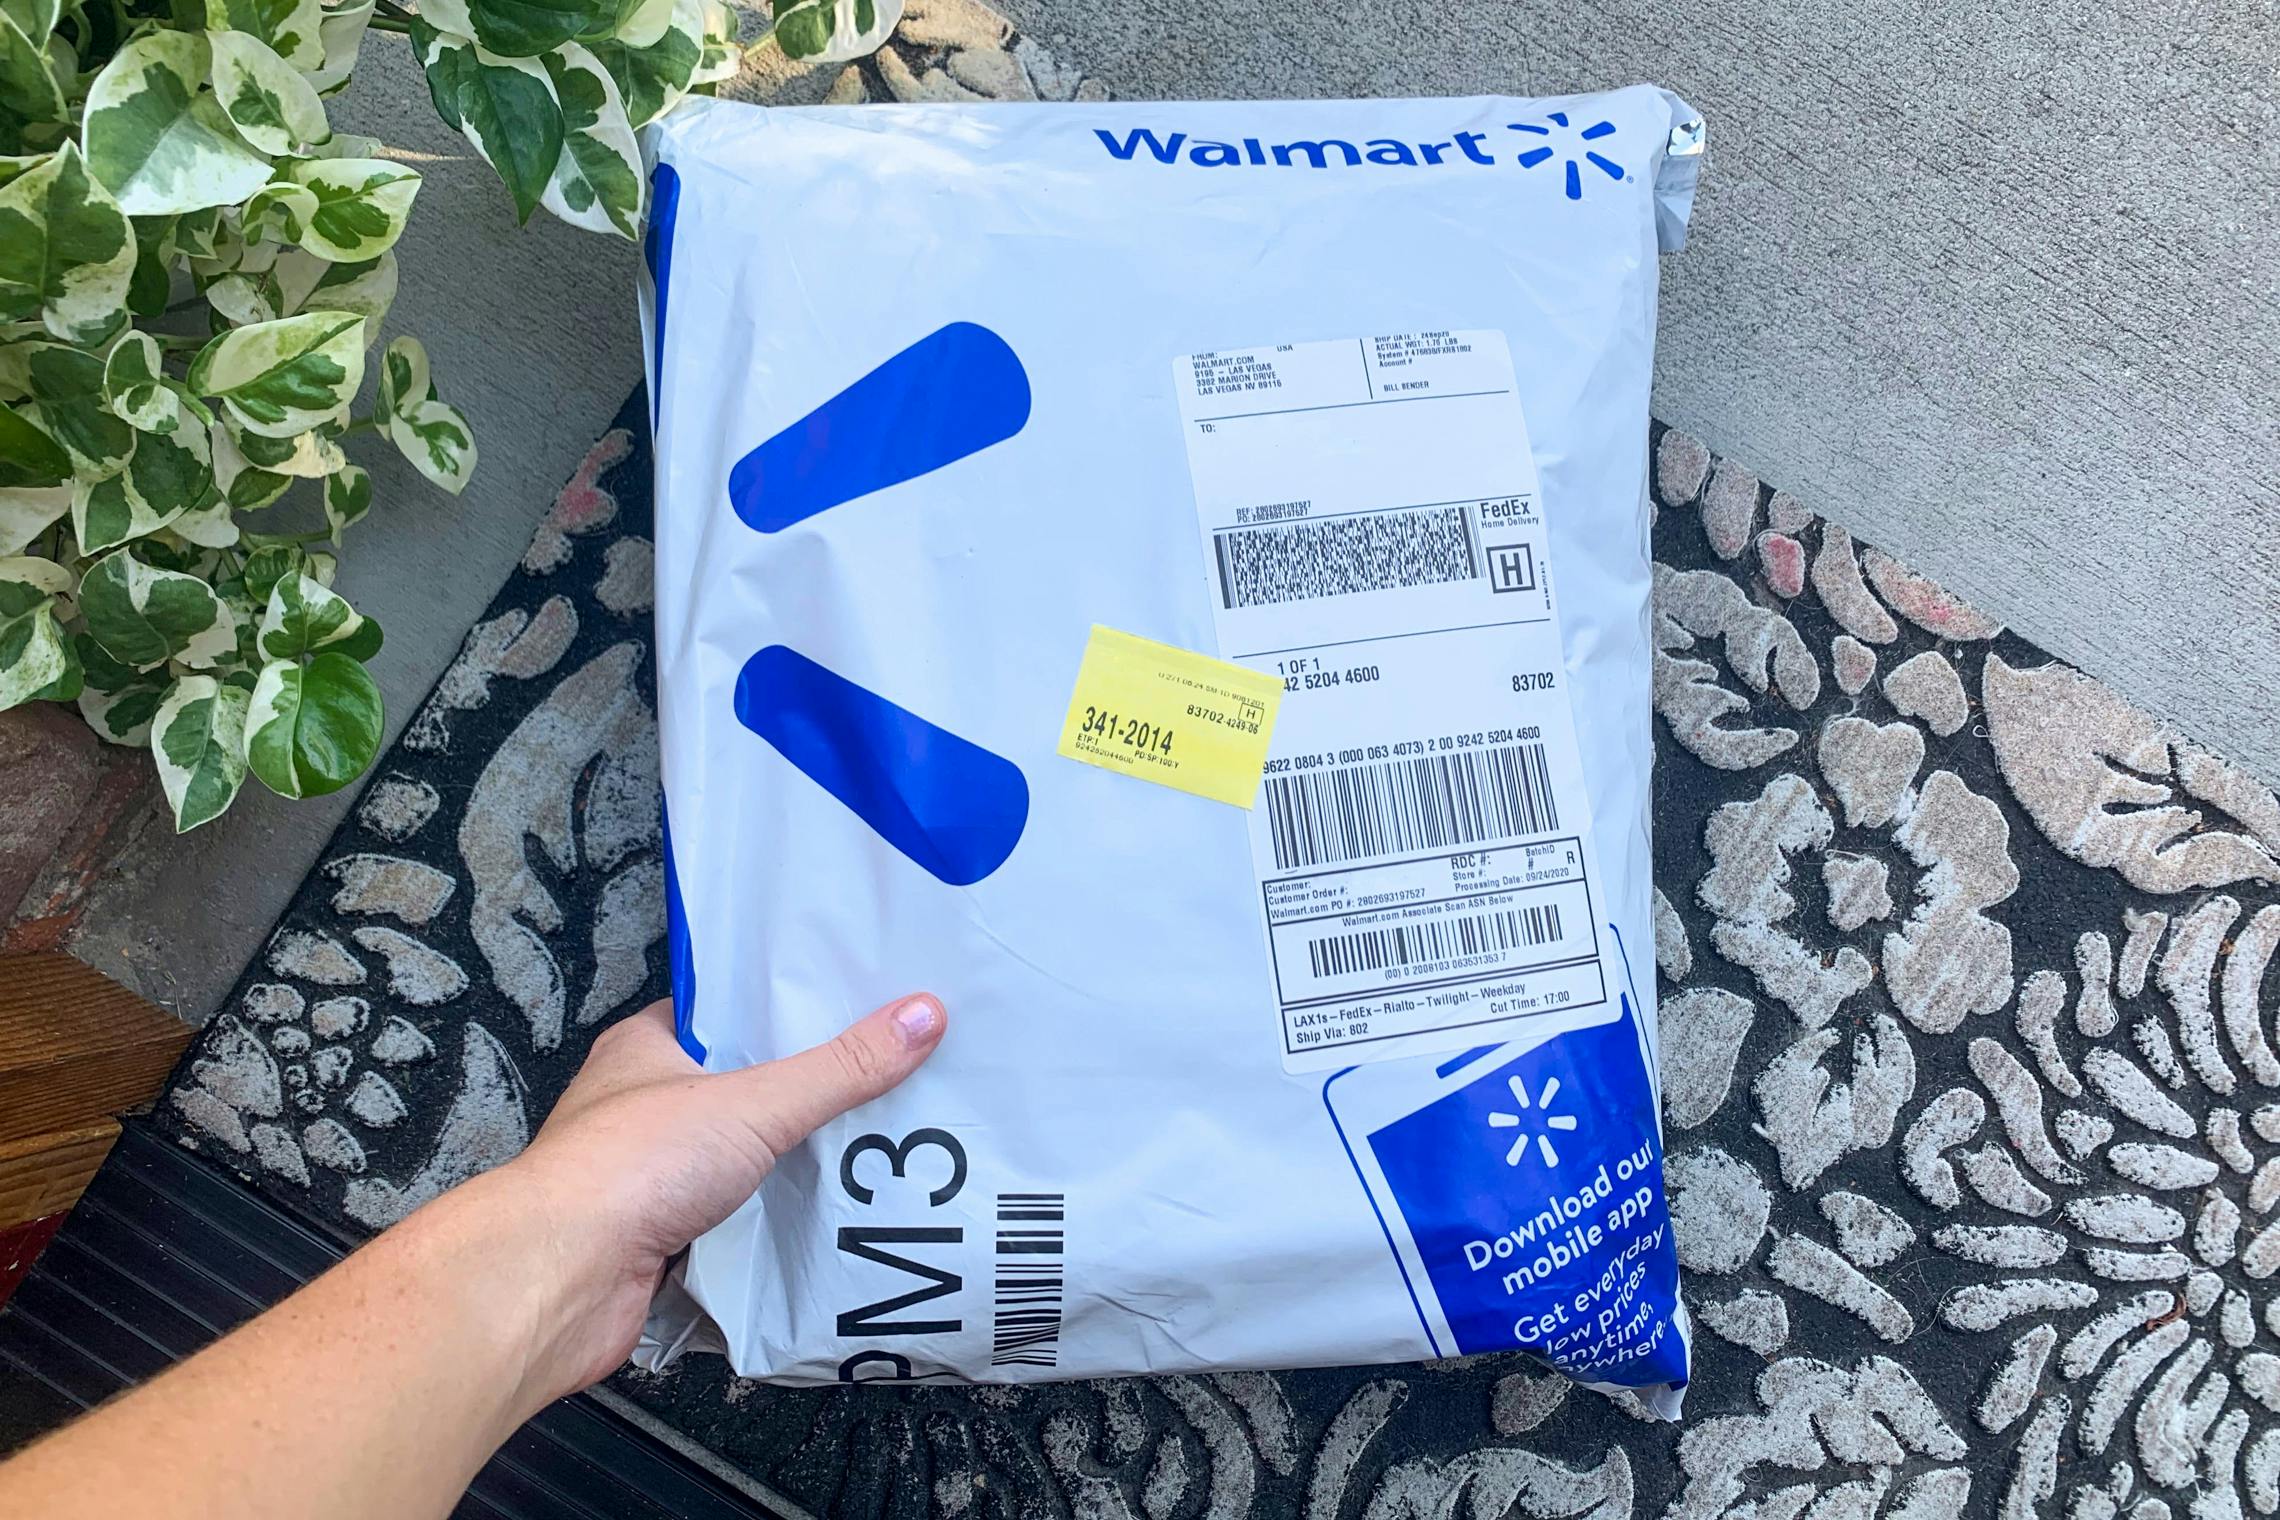 A person picking up an Walmart online delivery package from their front porch.